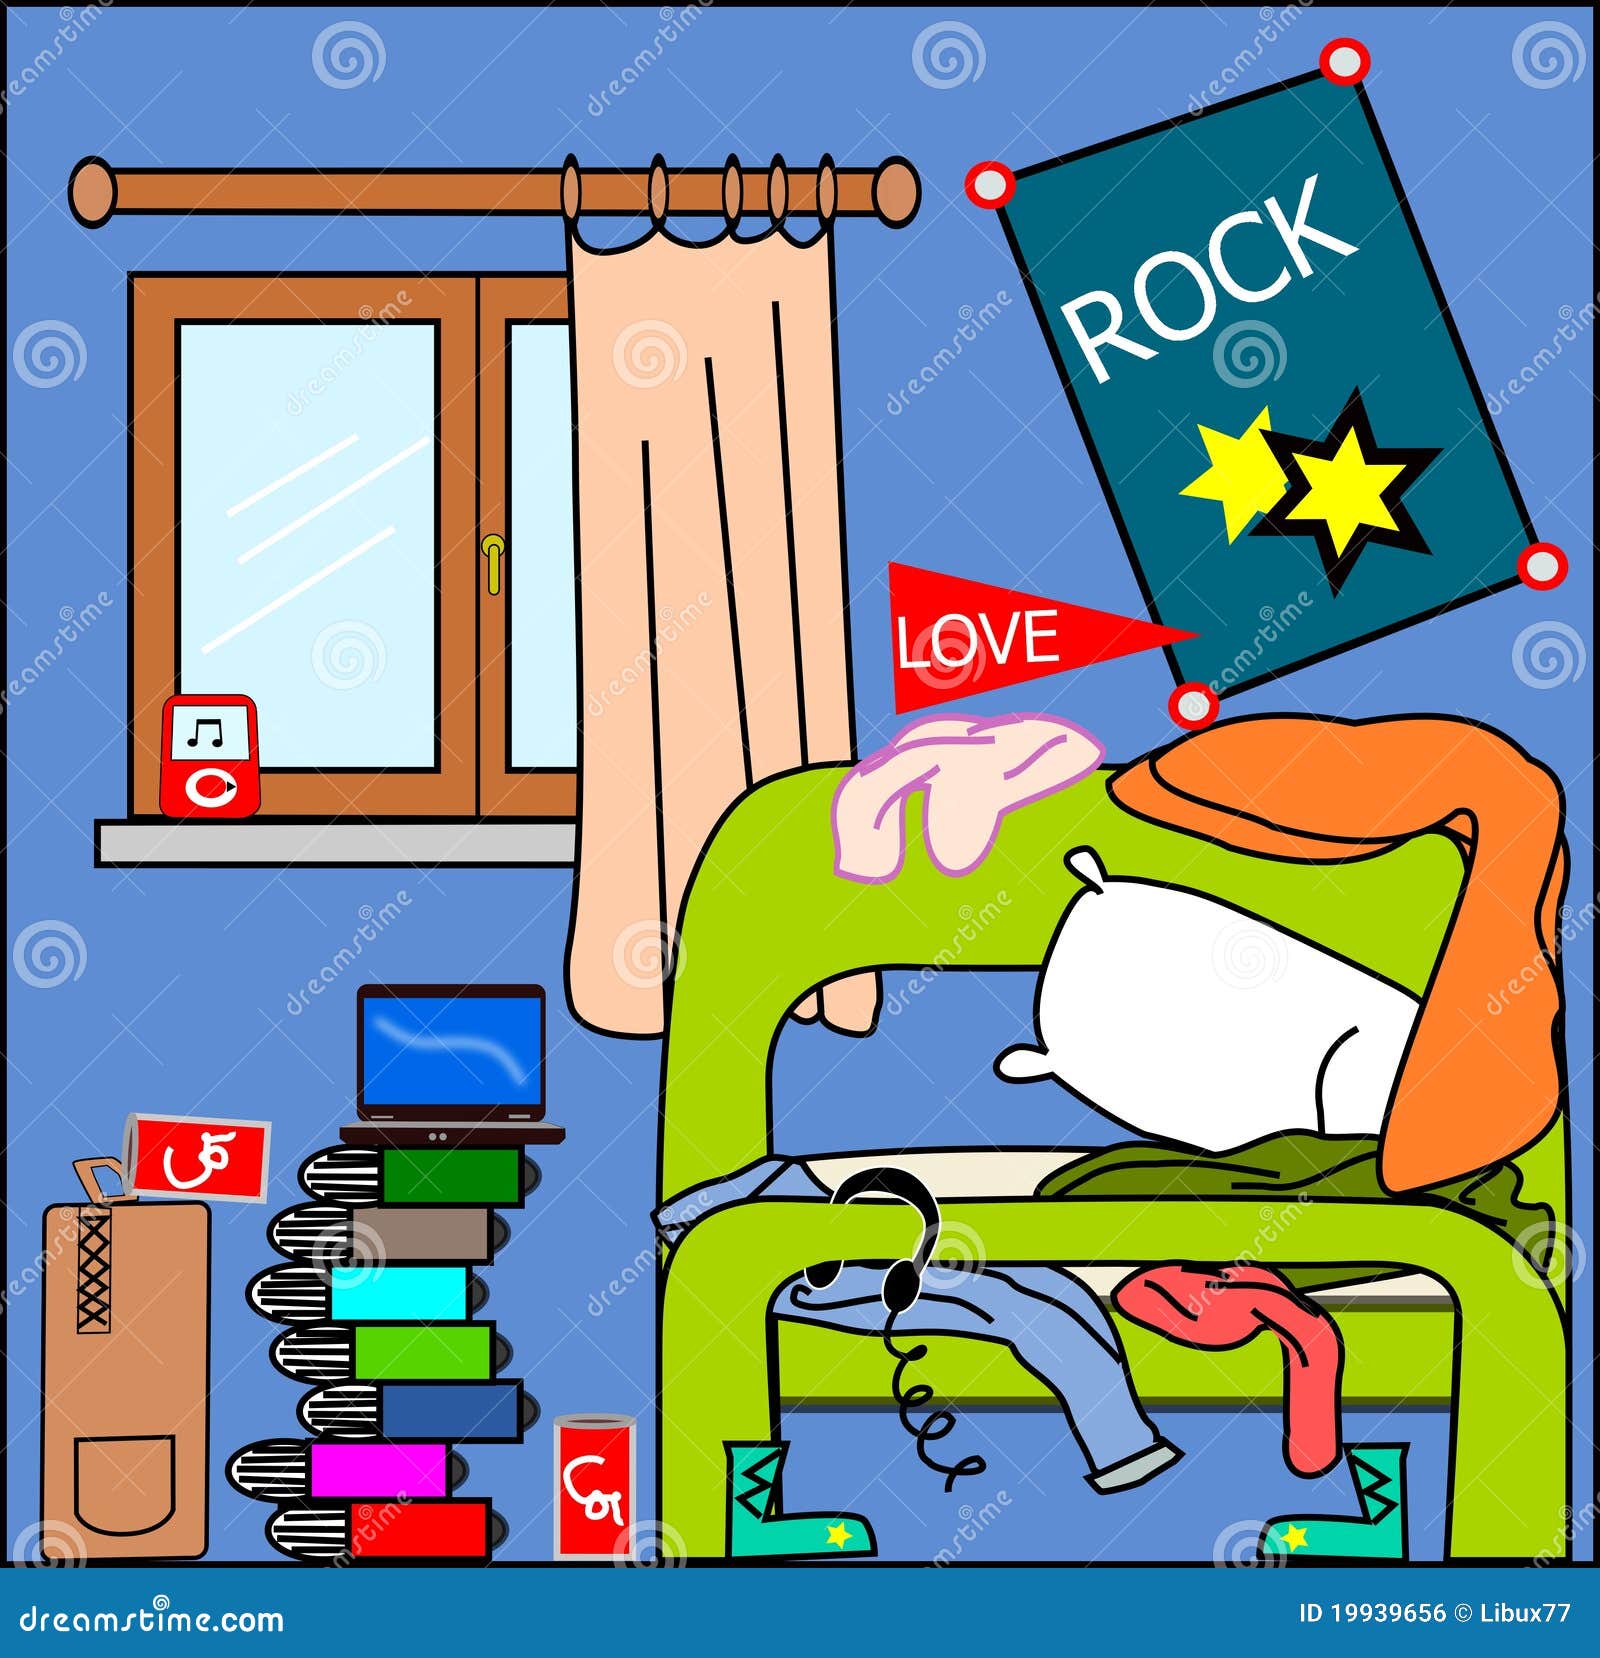 file room clipart - photo #11